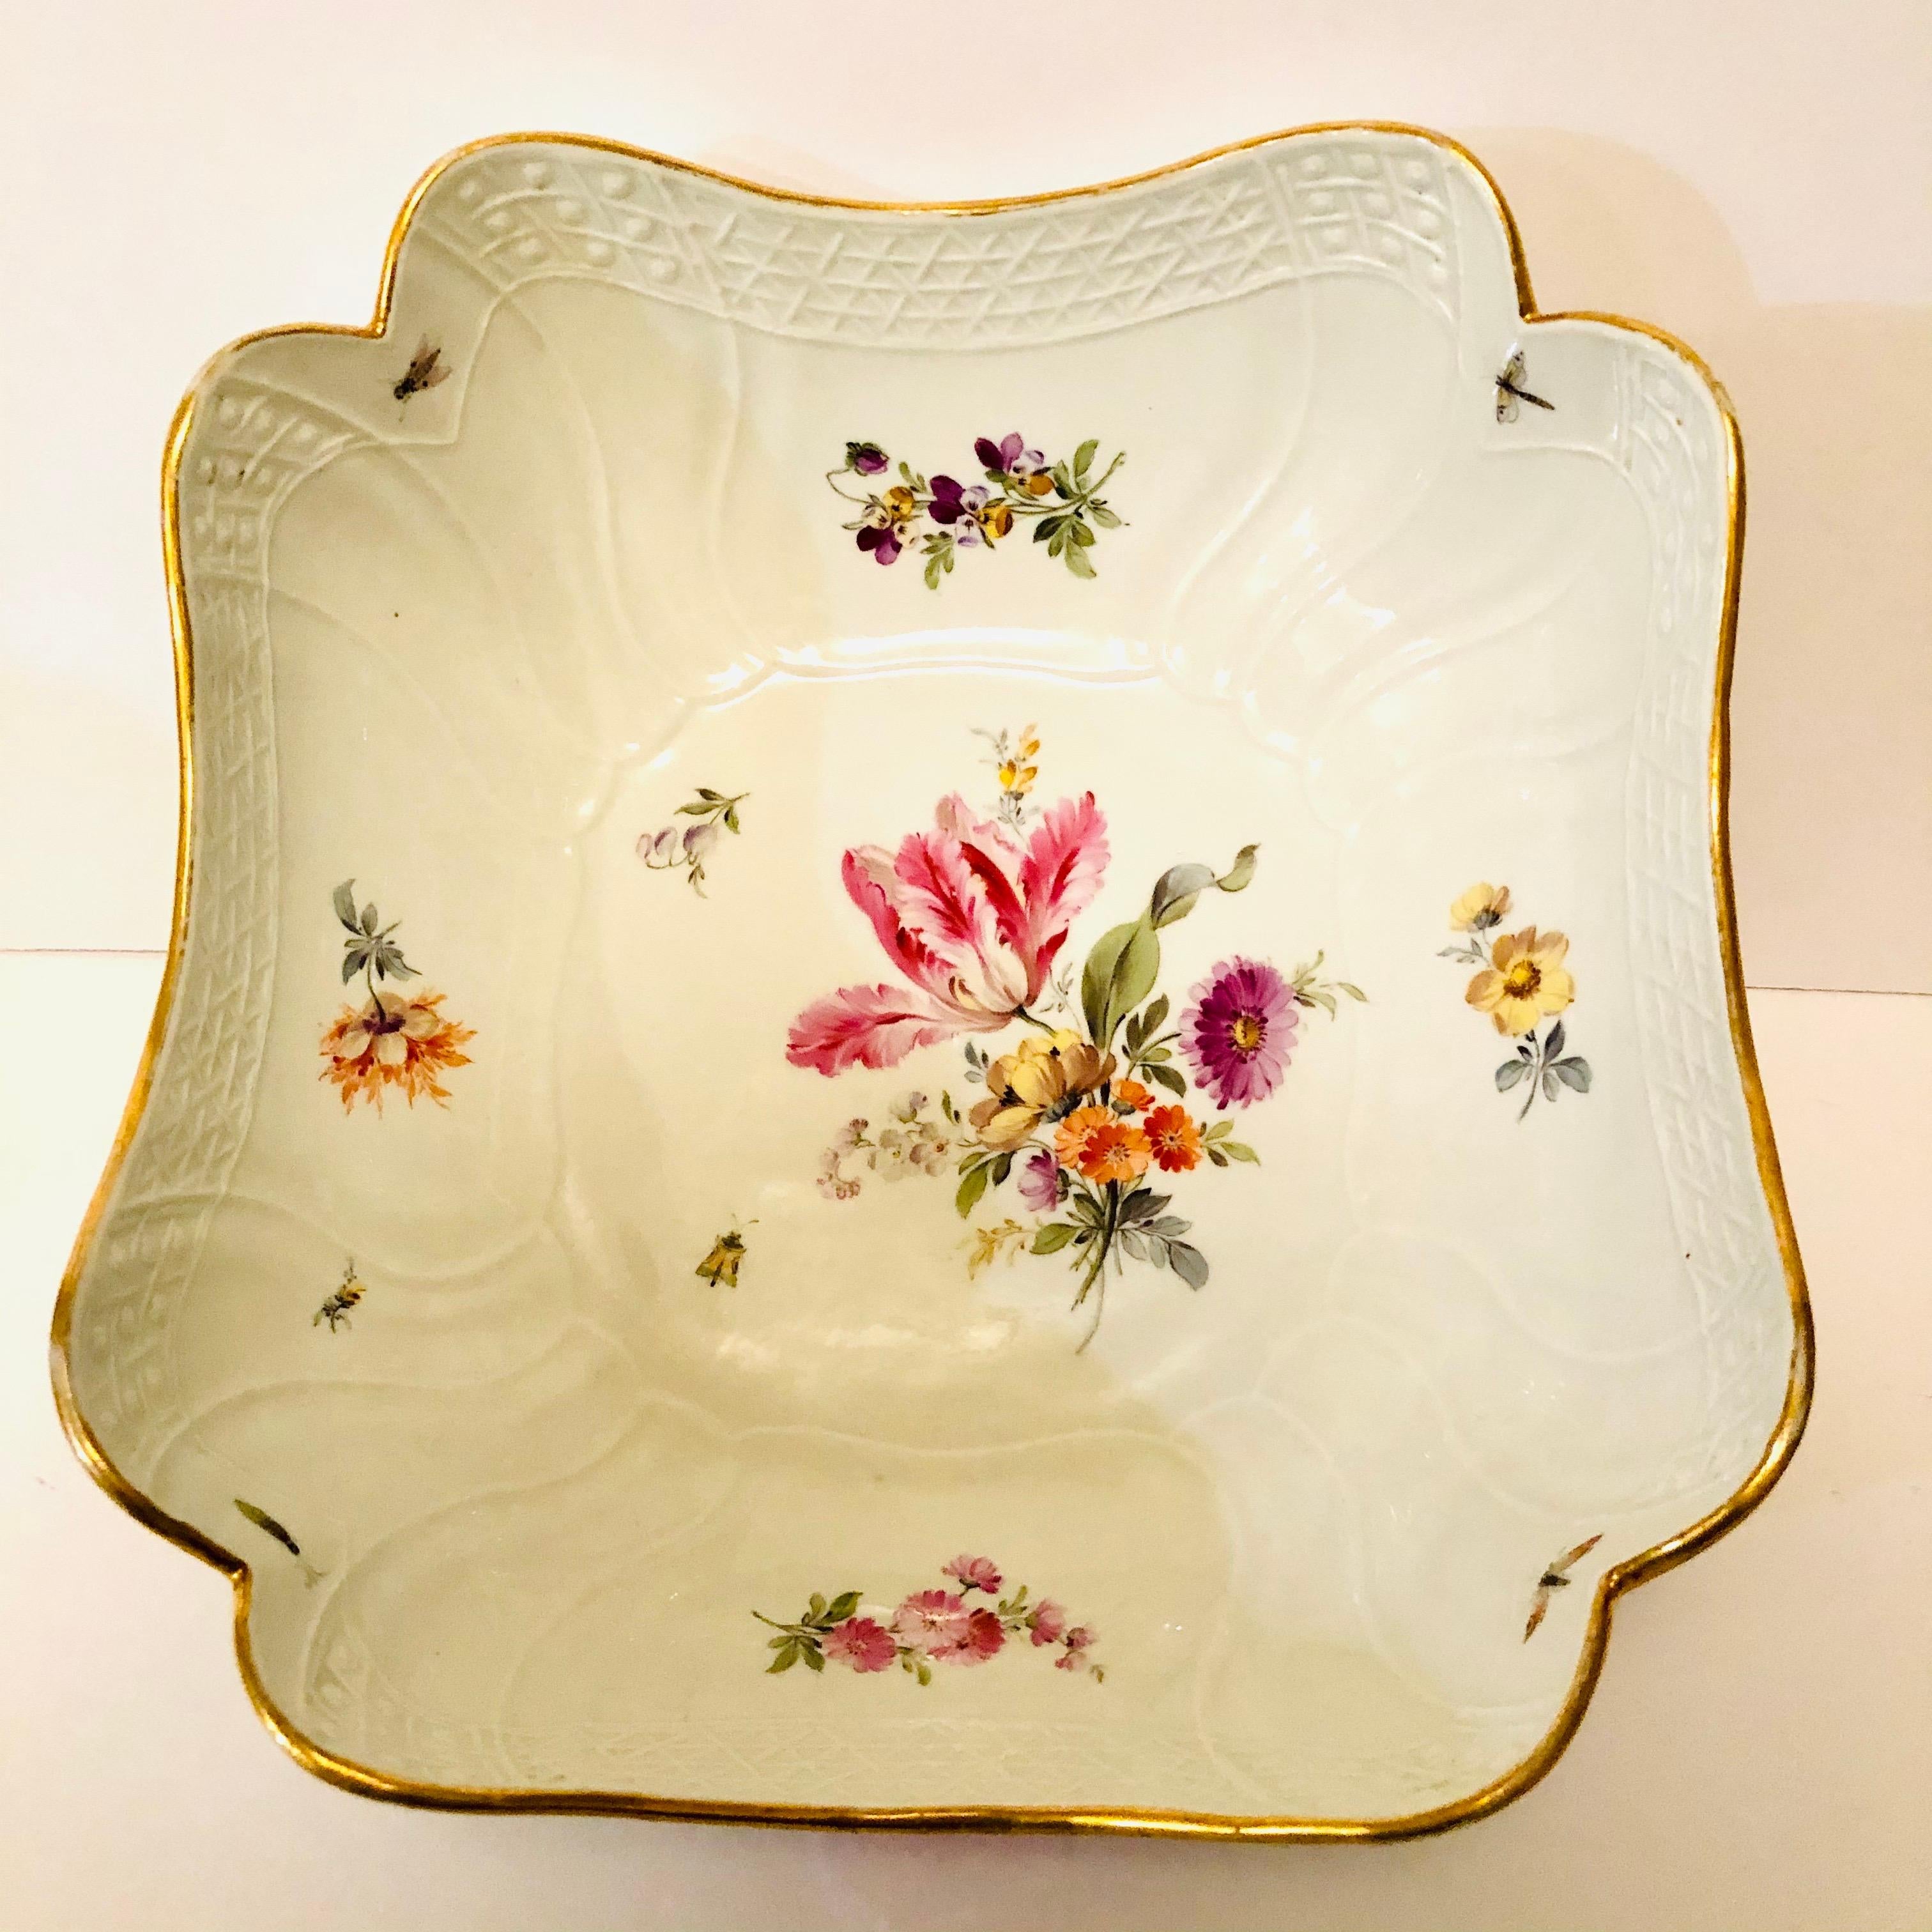 Romantic Meissen Four Cornered Deep Serving Bowl from the 1880s with Five Flower Bouquets